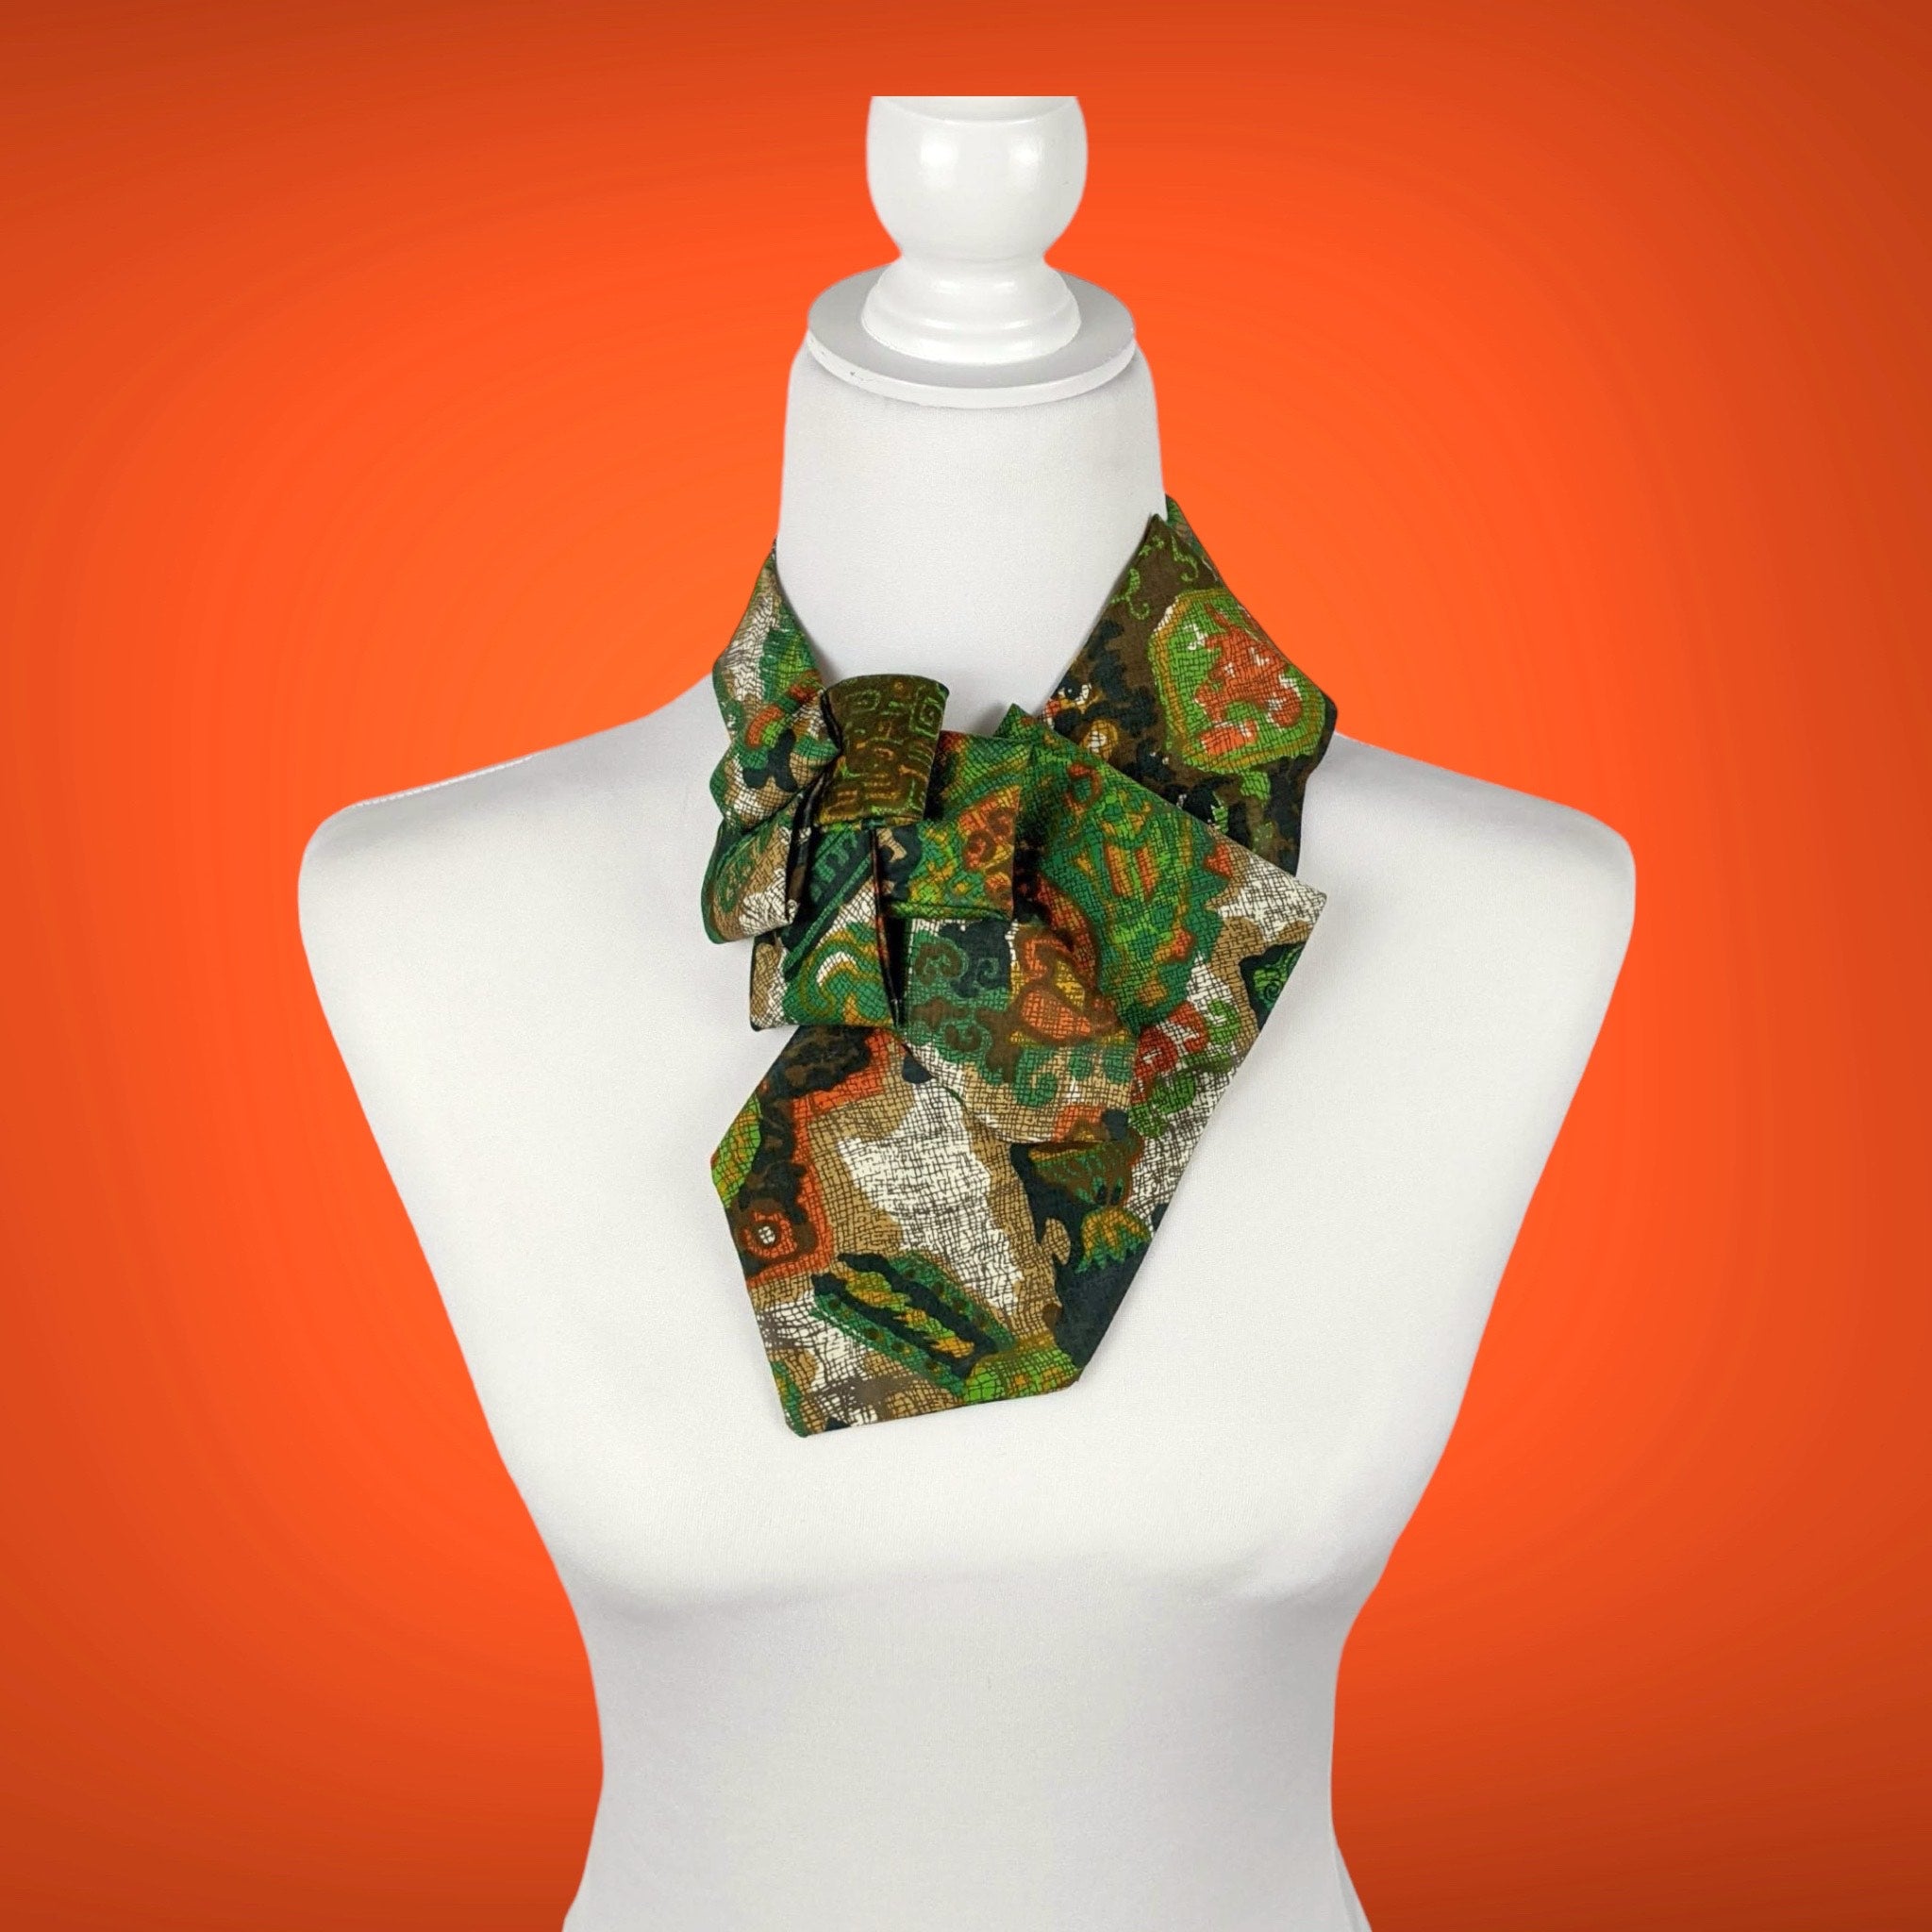 Ascot Scarf In A Green, Orange And Brown Print.